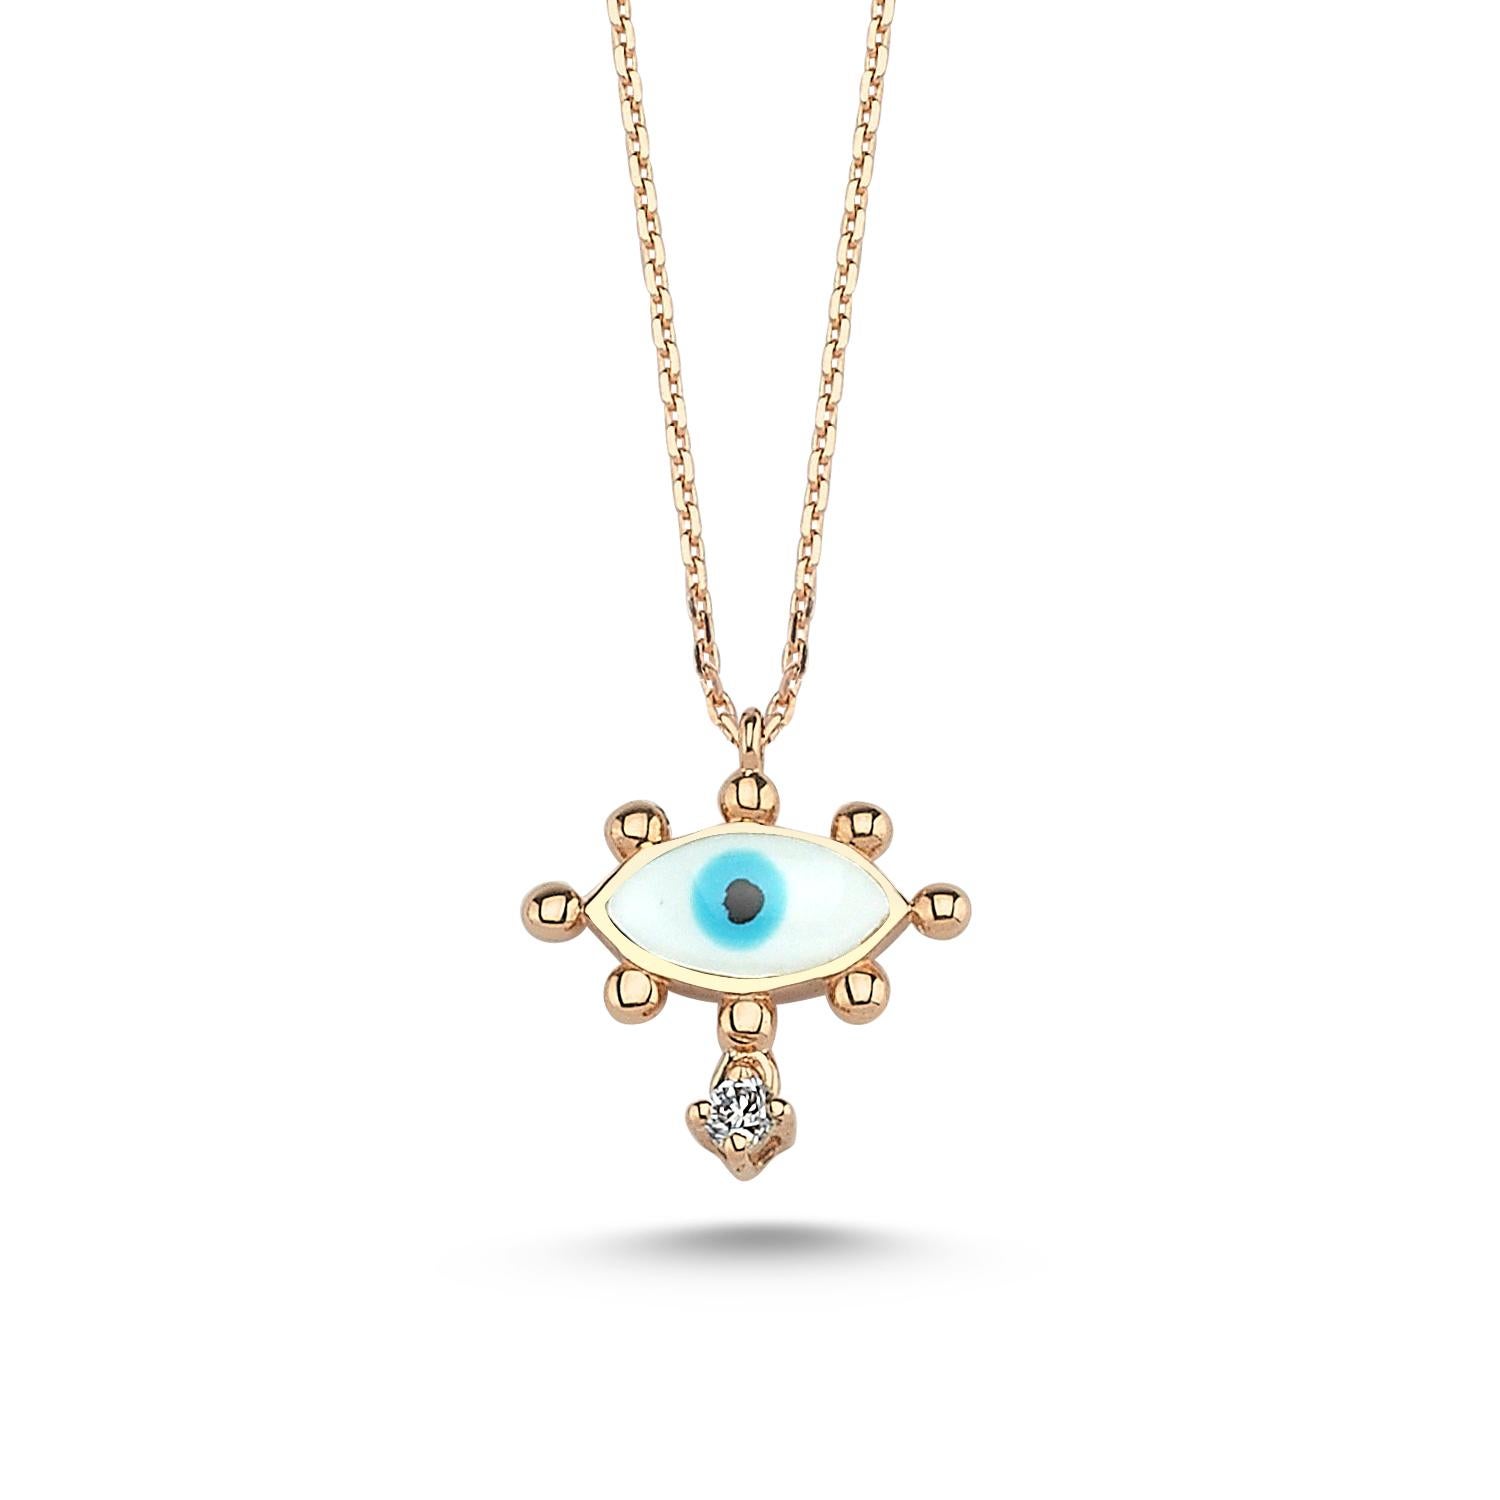 Evil eye necklace with white enamel and 0.02ct white diamond by Selda Jewellery

Additional Information:-
Collection: Art of giving collection
14K Rose gold
0.02ct White diamond
Chain length 42 cm
Pendant diameter 1 cm